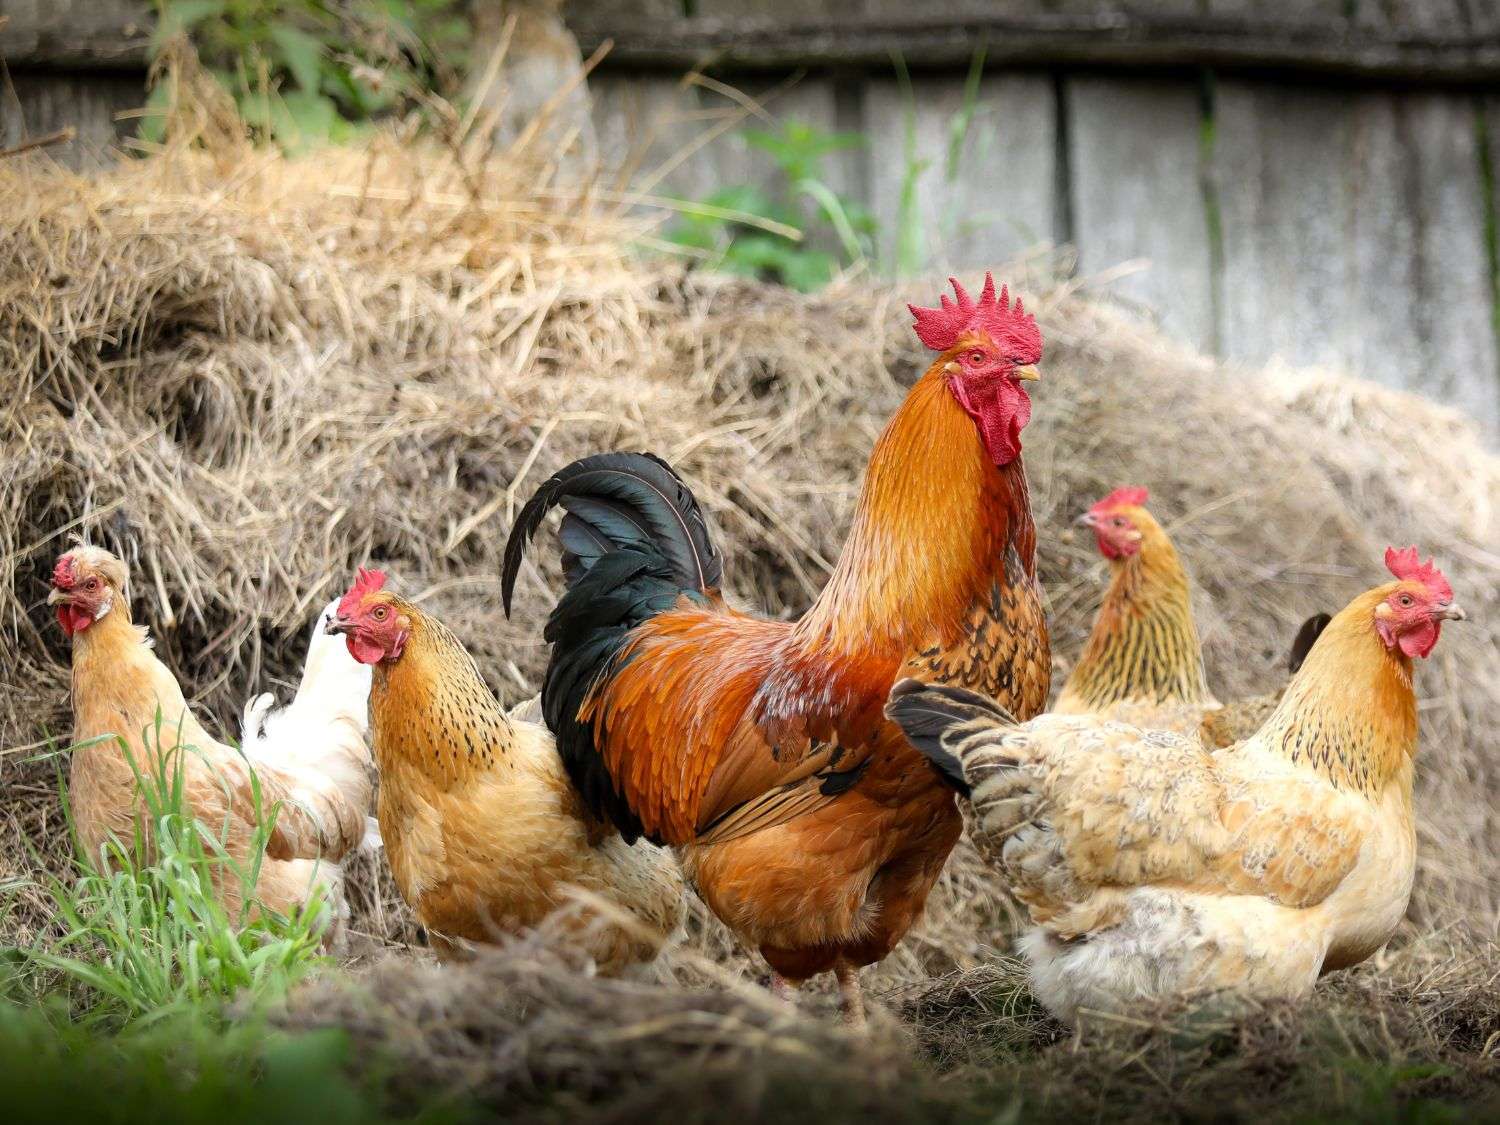 A group of chickens outside in front of a haystack